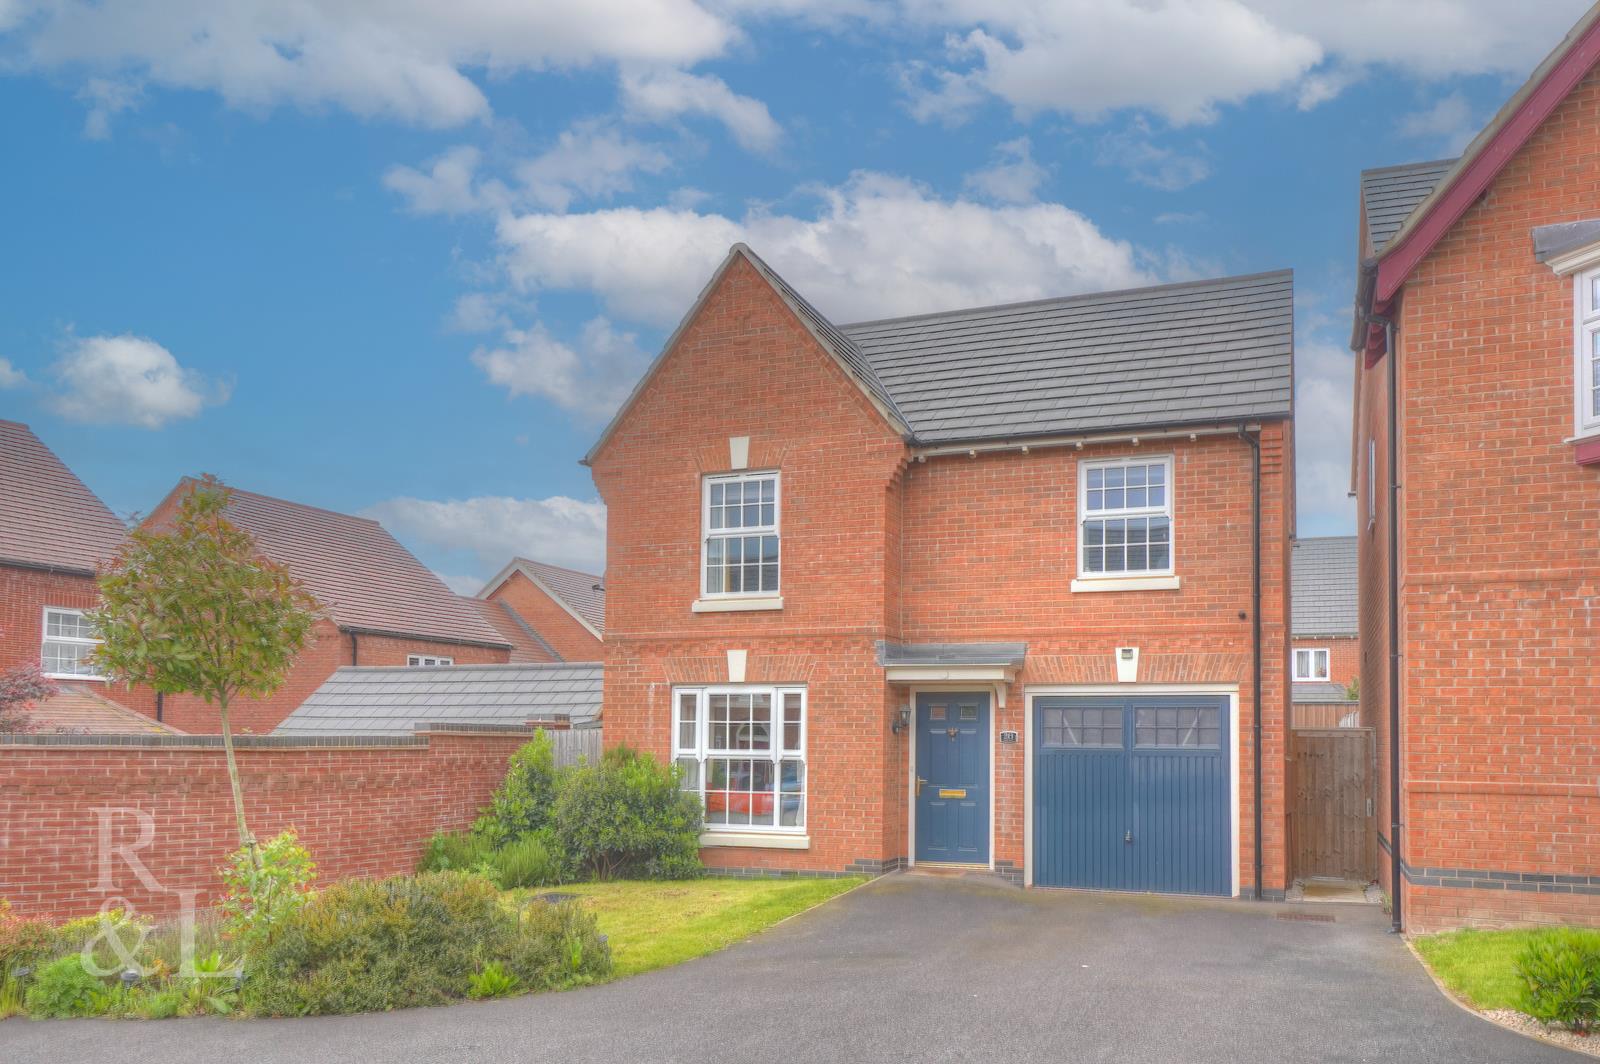 Property image for Winfield Way, Blackfordby, Swadlincote